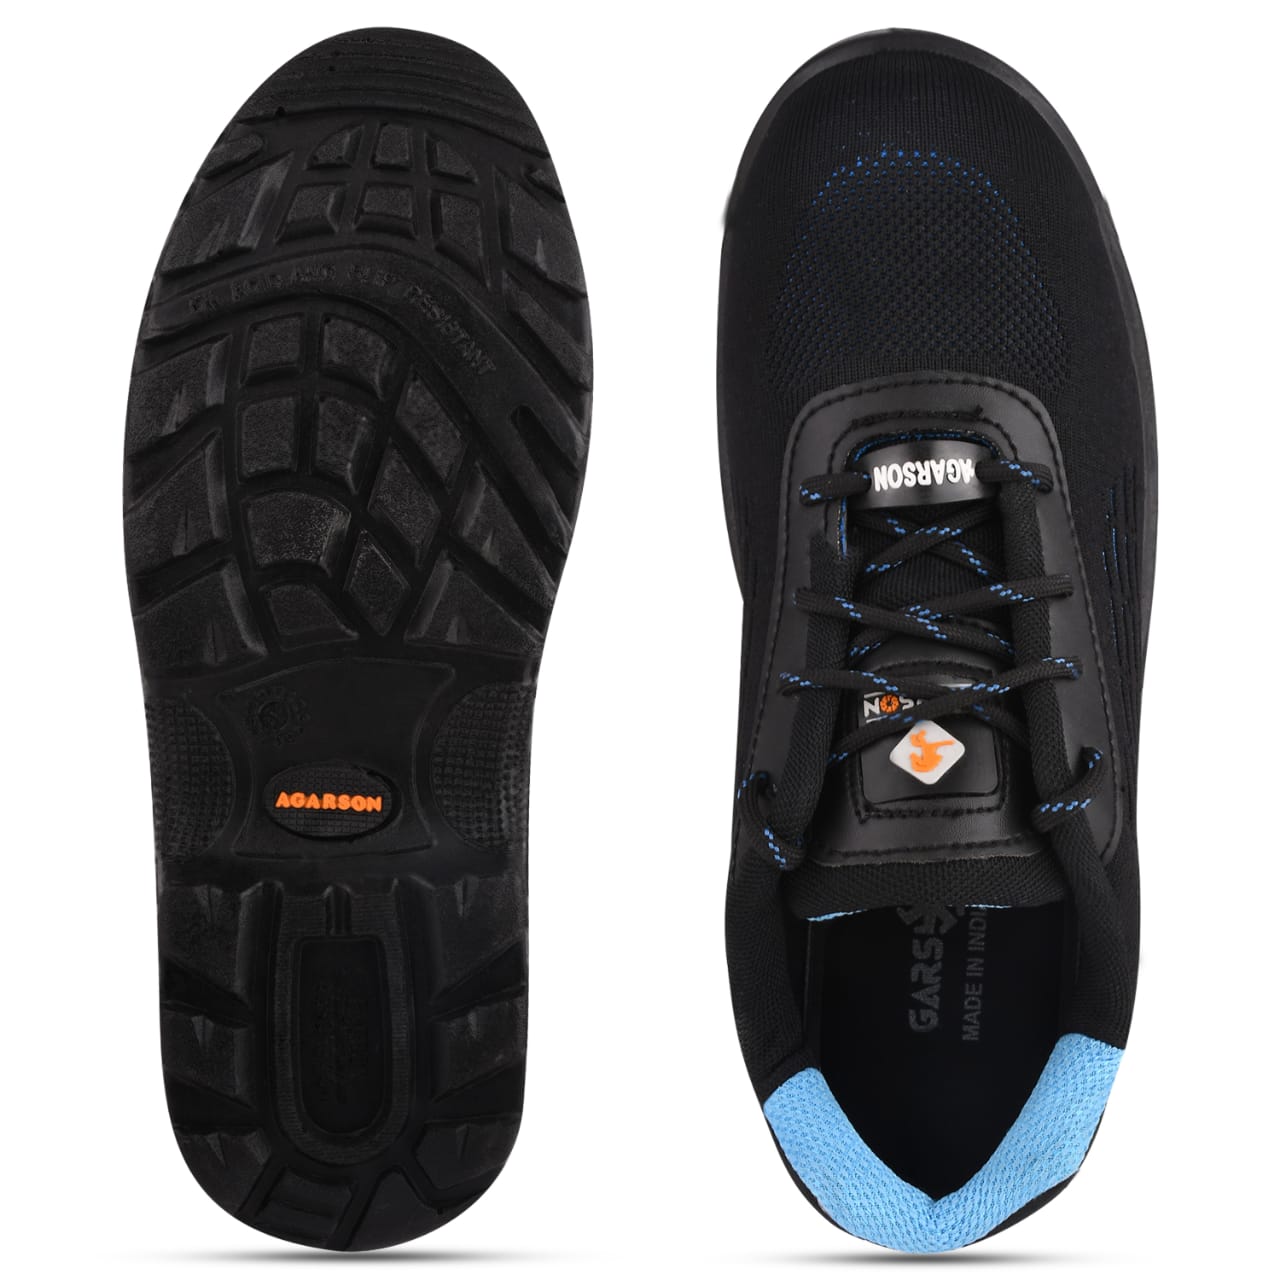 agarson PVC Sporty Safety Shoe at Rs 650 in Rajkot | ID: 2849482059033